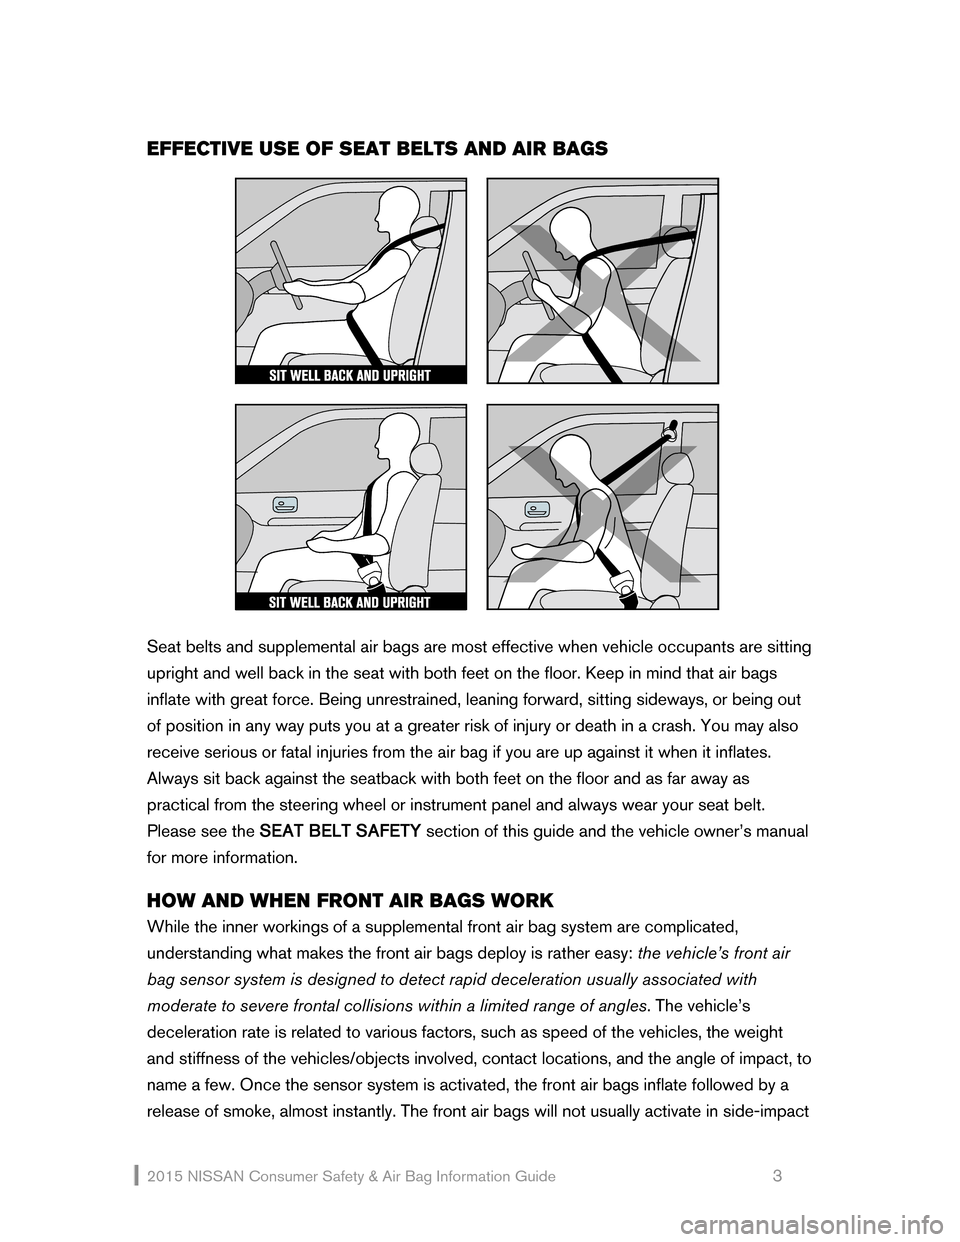 NISSAN FRONTIER 2015 D23 / 3.G Consumer Safety Air Bag Information Guide 2015 NI\f\fAN  Consumer \fafety  & Air Bag Information Guide                                                     \b 
EFFE\fTIVE USE OF SEAT BELTS AND AIR BAGS 
 
 
 
\feat belts and supplemental air b